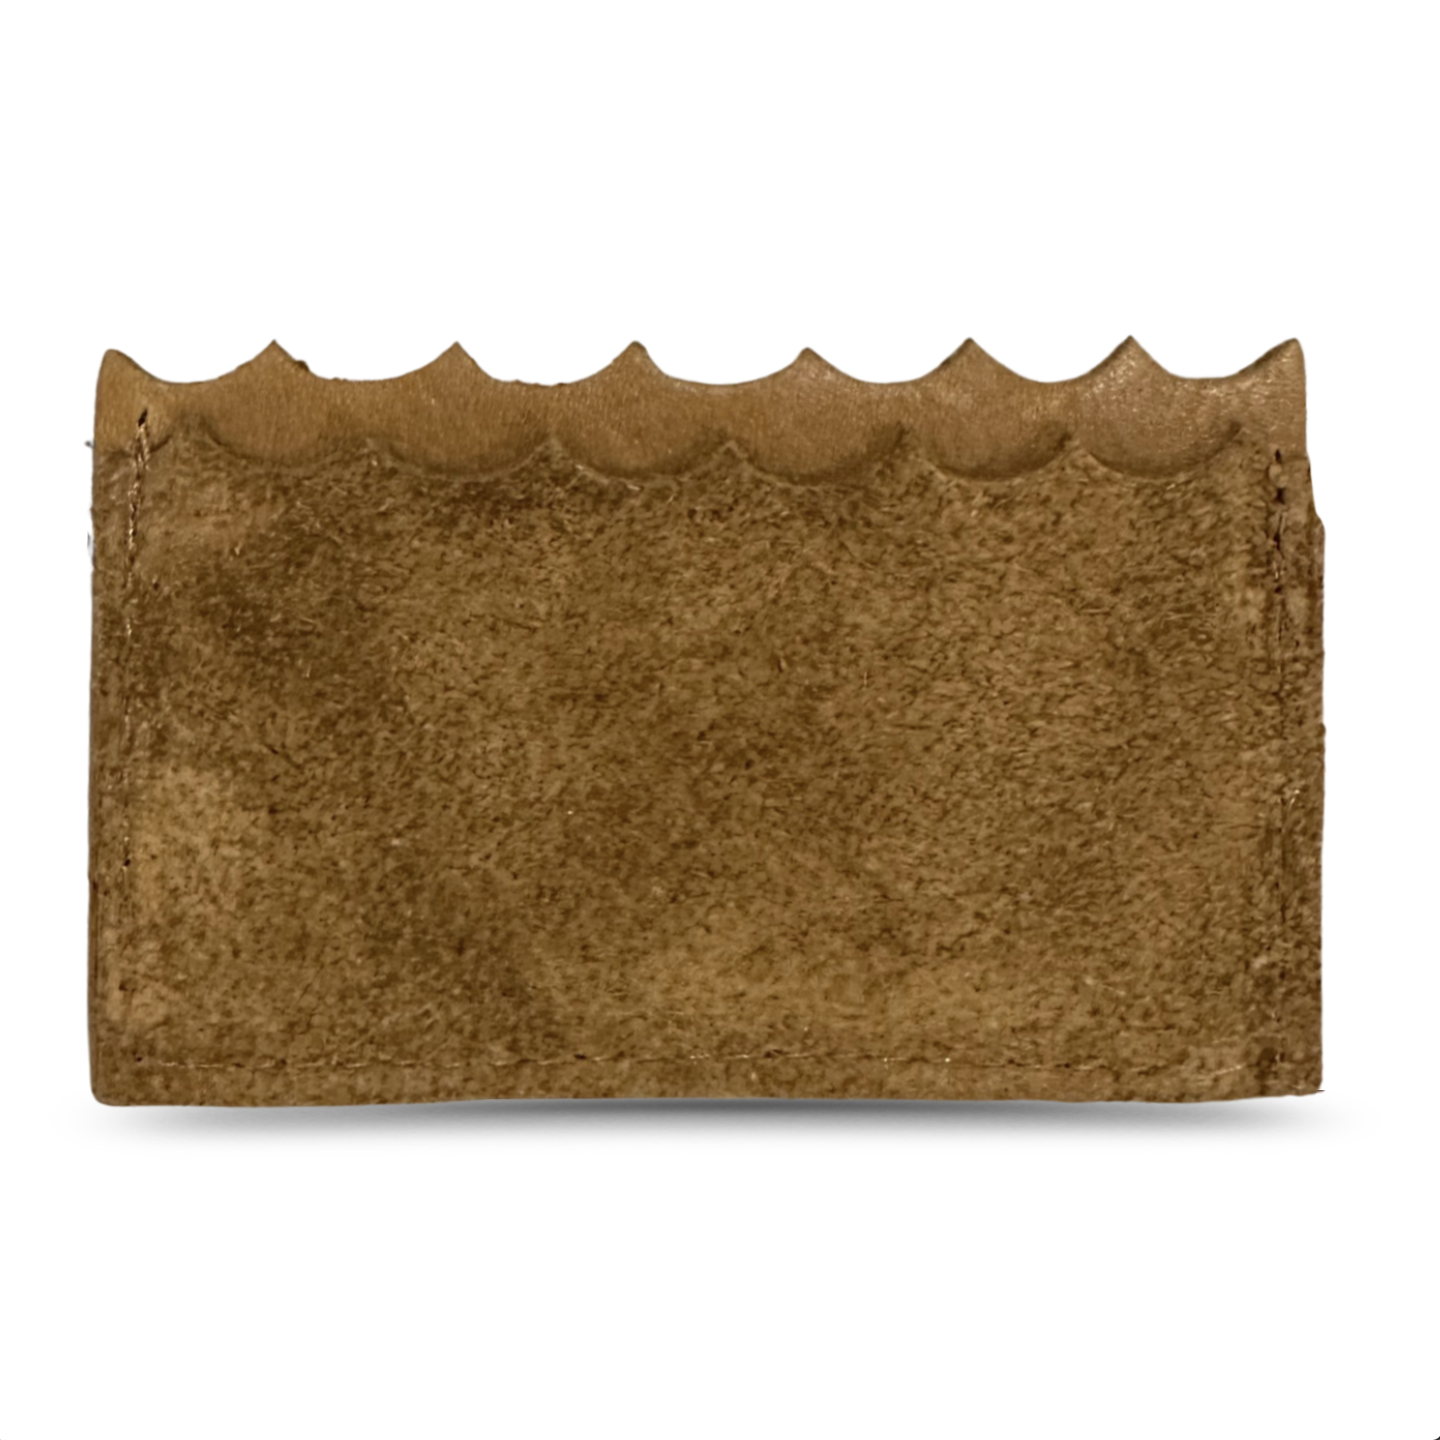 Beach Nut Leather Mini Wallet "Inspired by Salt Air"